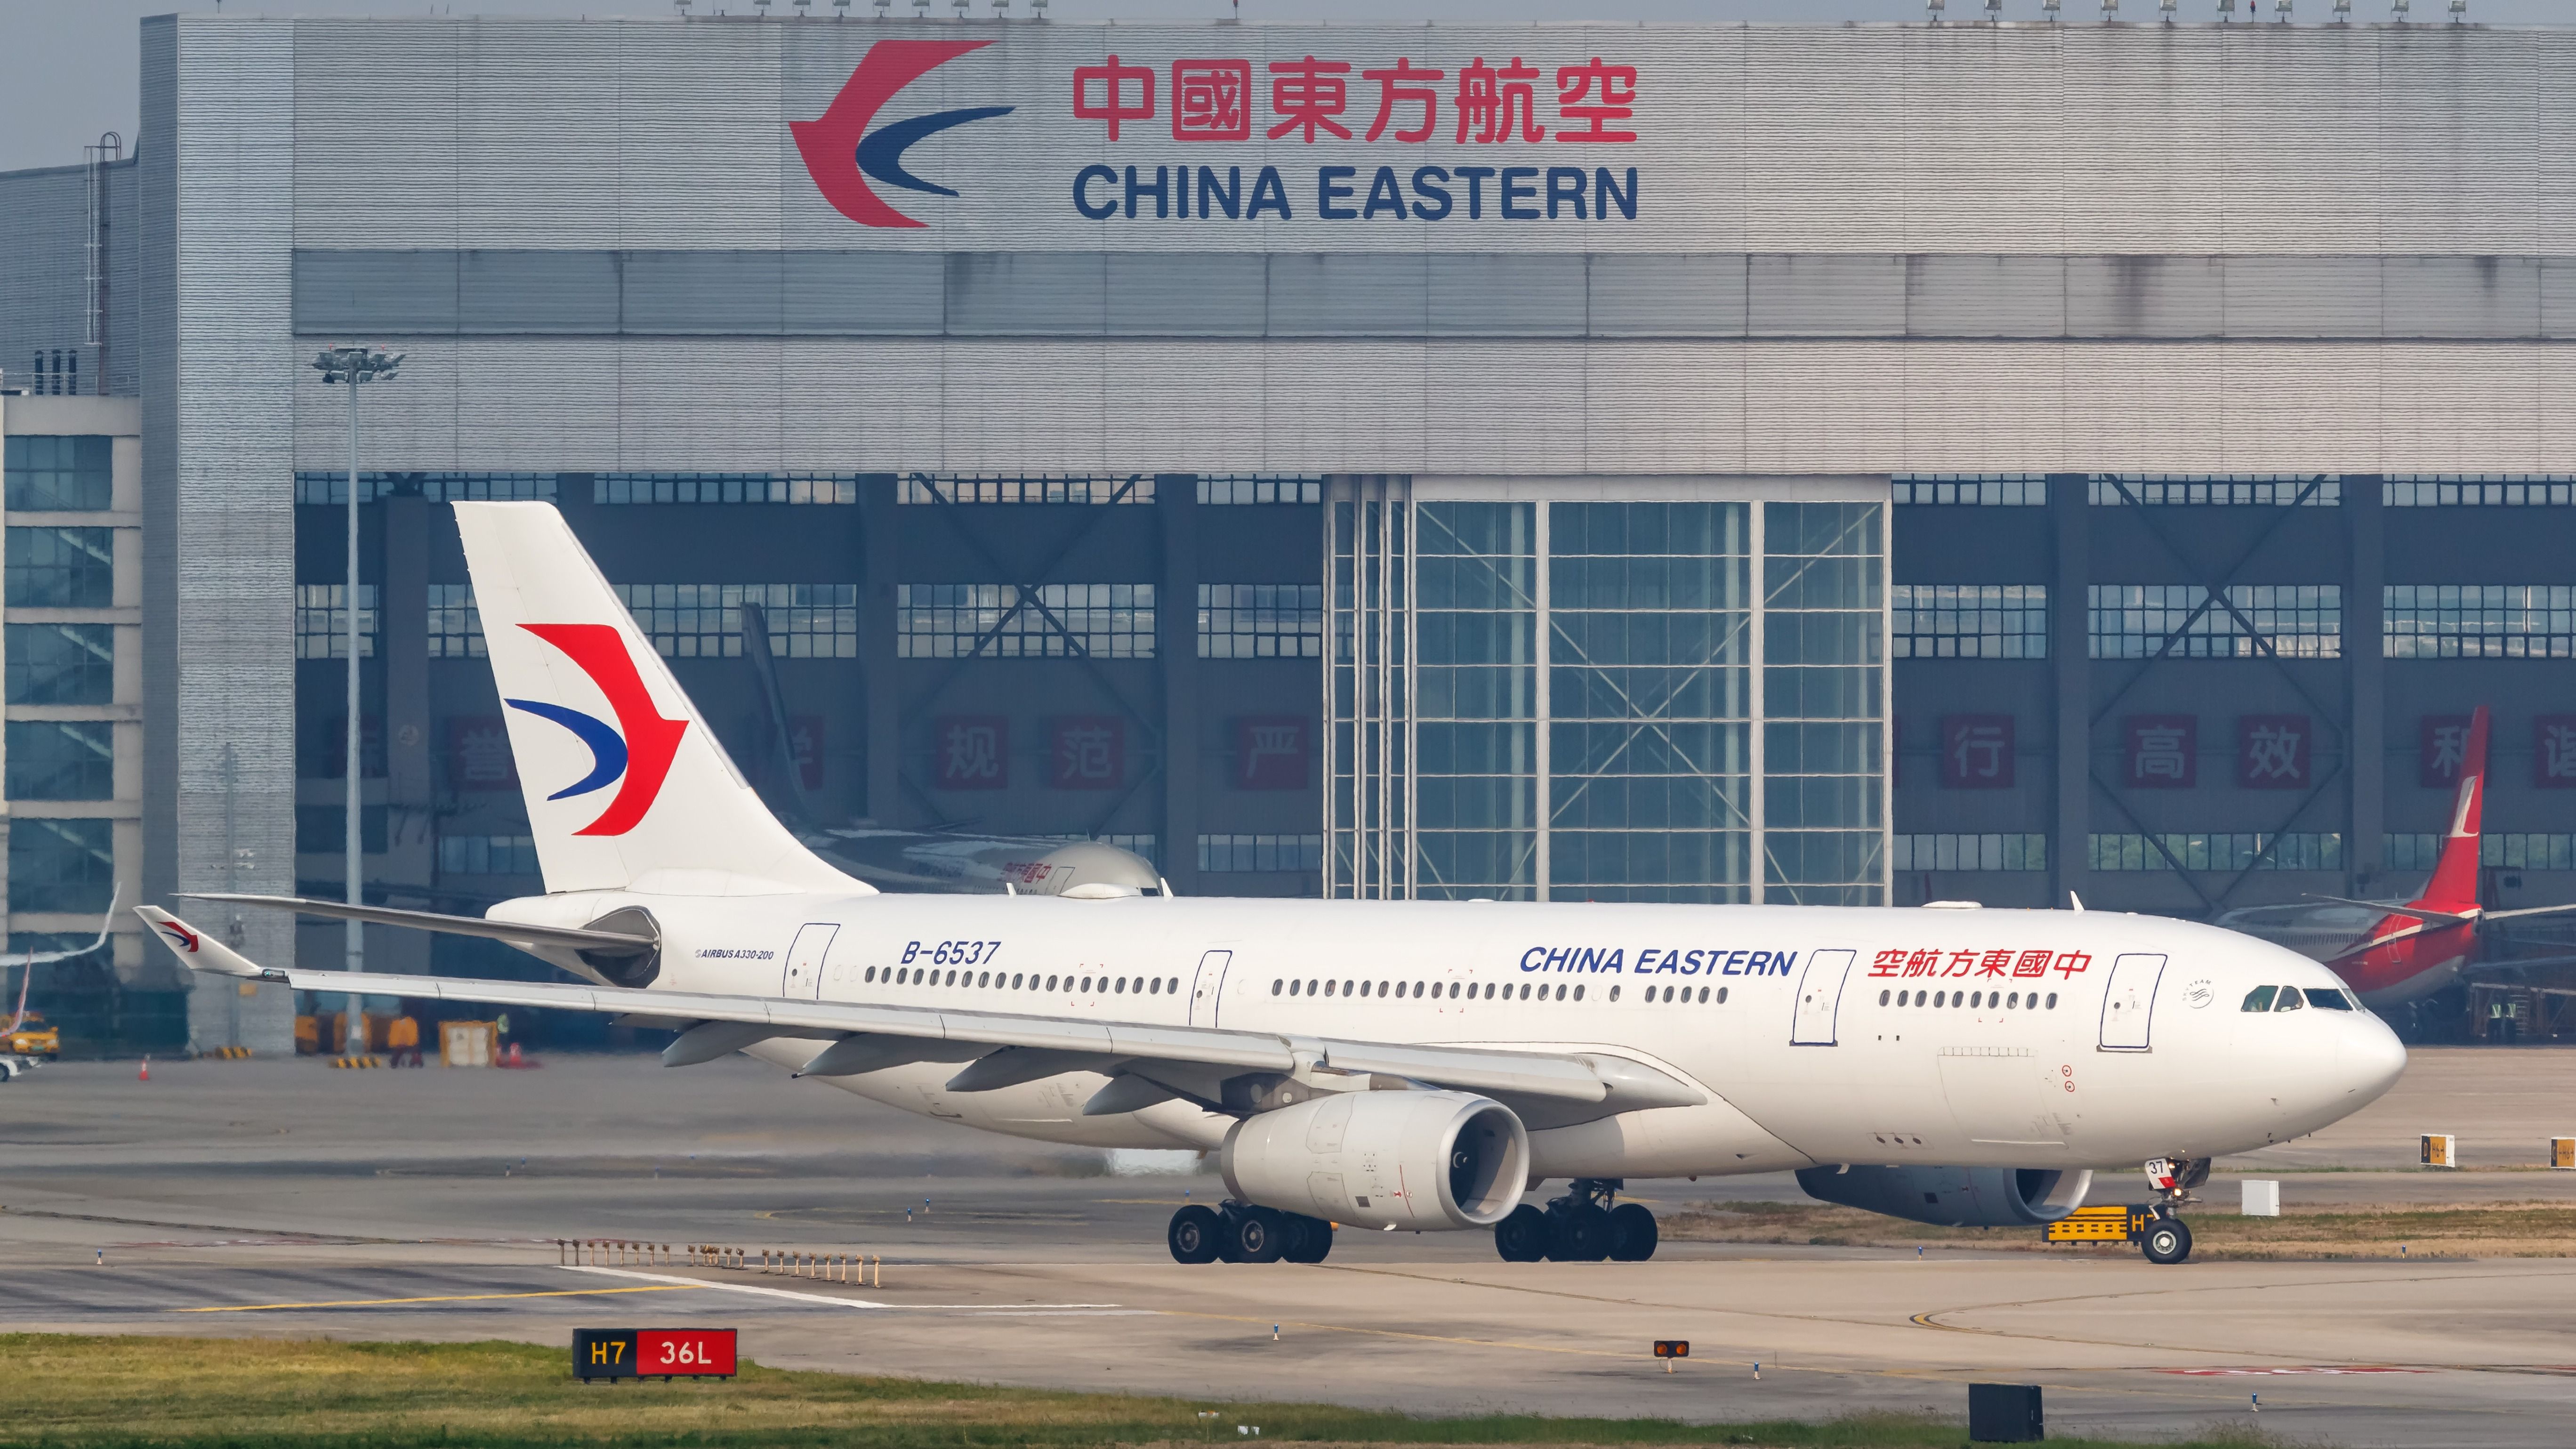 A China Eastern Airlines Airbus A330-200 on an airport apron.